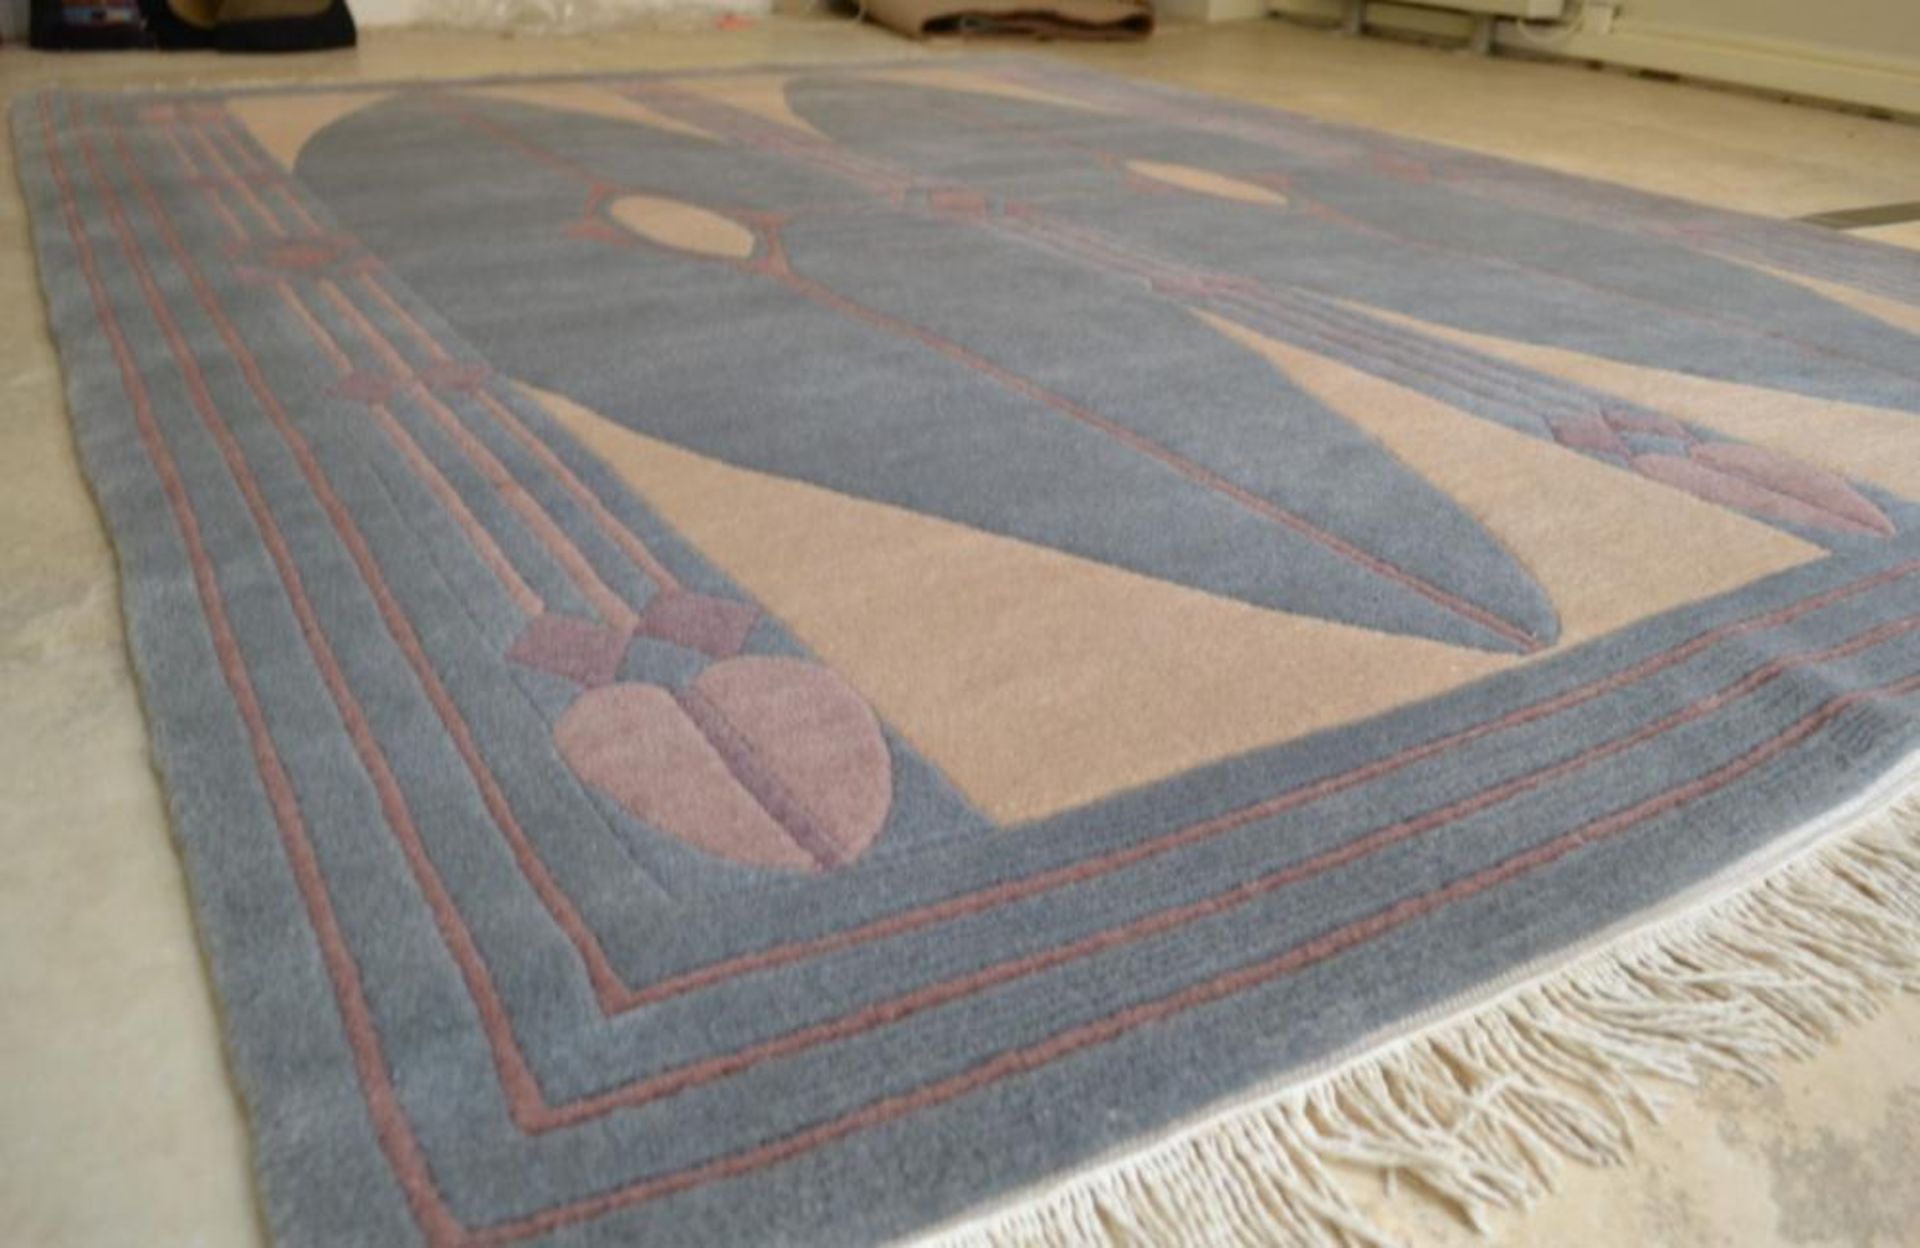 1 x Hand Knotted Mackintosh Design Nepalese Carpet - 100% Wool - Dimensions: 174x247cm - Unused - NO - Image 5 of 12